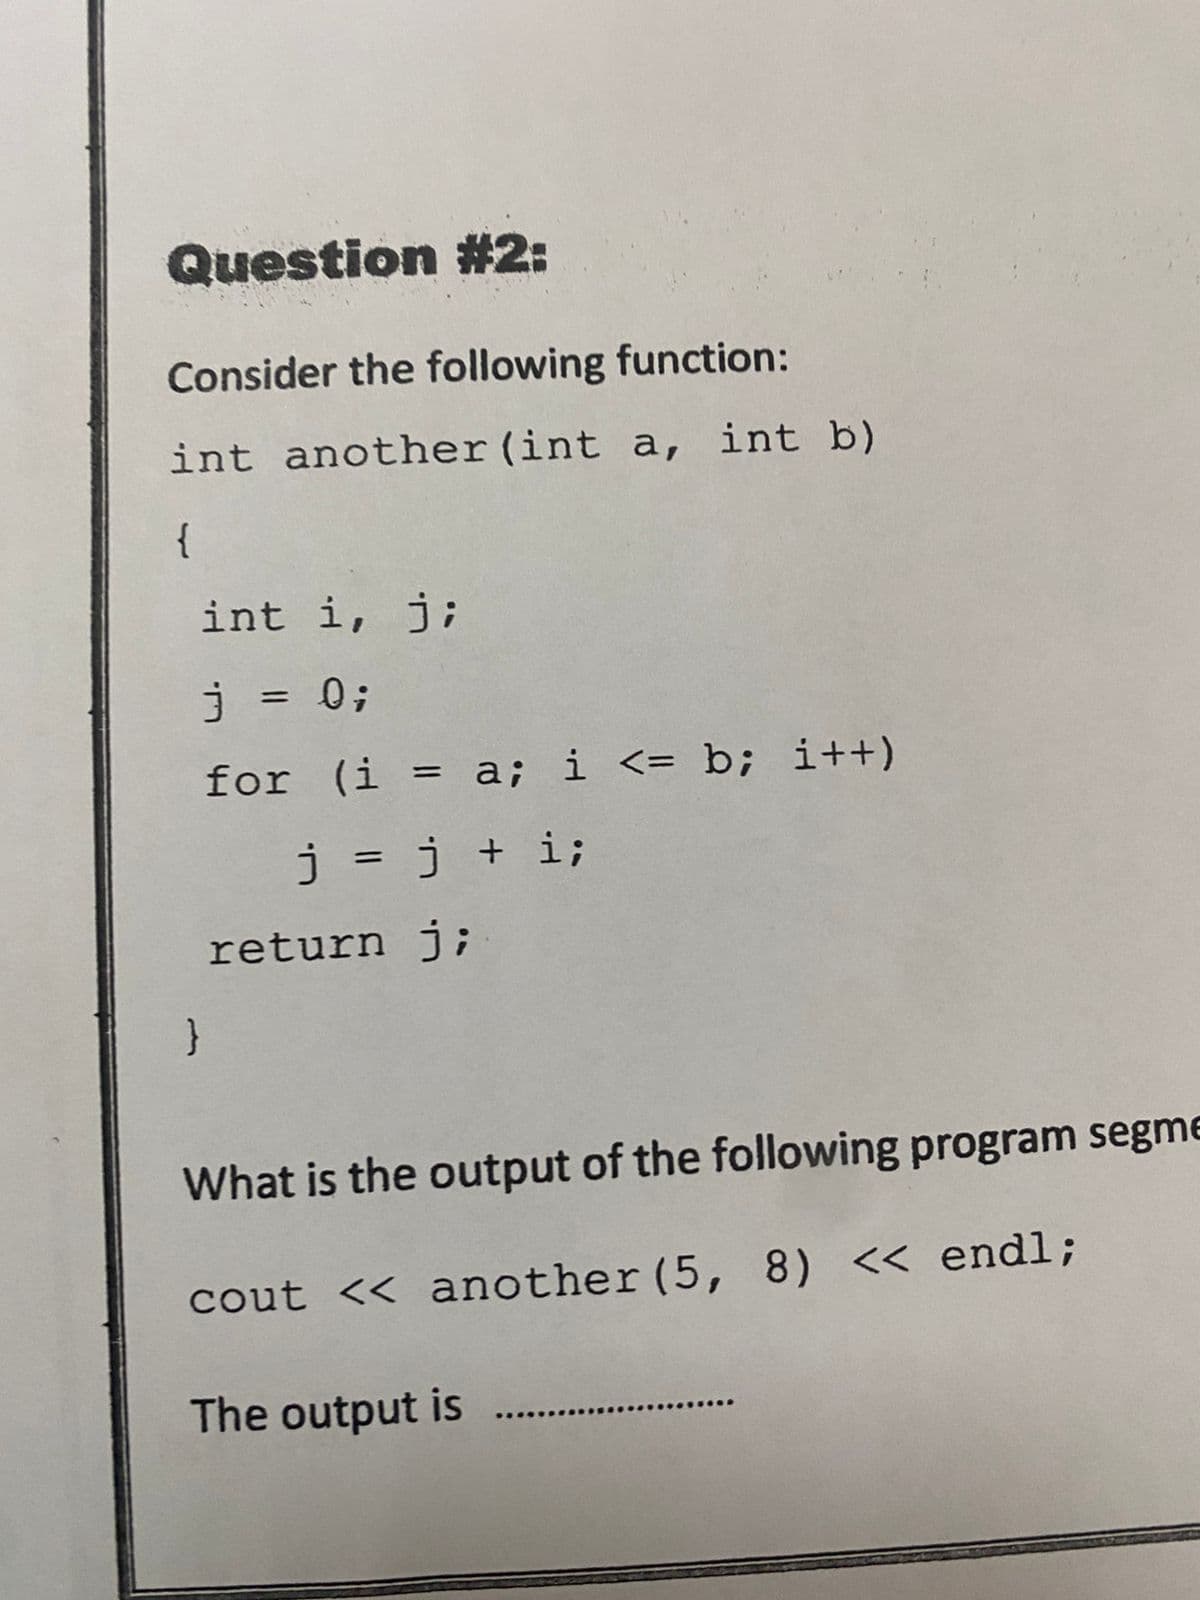 Question #2:
Consider the following function:
int another (int a, int b)
{
int i, j;
j = 0;
for (i = a; i <= b; i++)
j = j + i;
}
return j;
What is the output of the following program segme
cout << another (5, 8) << endl;
The output is